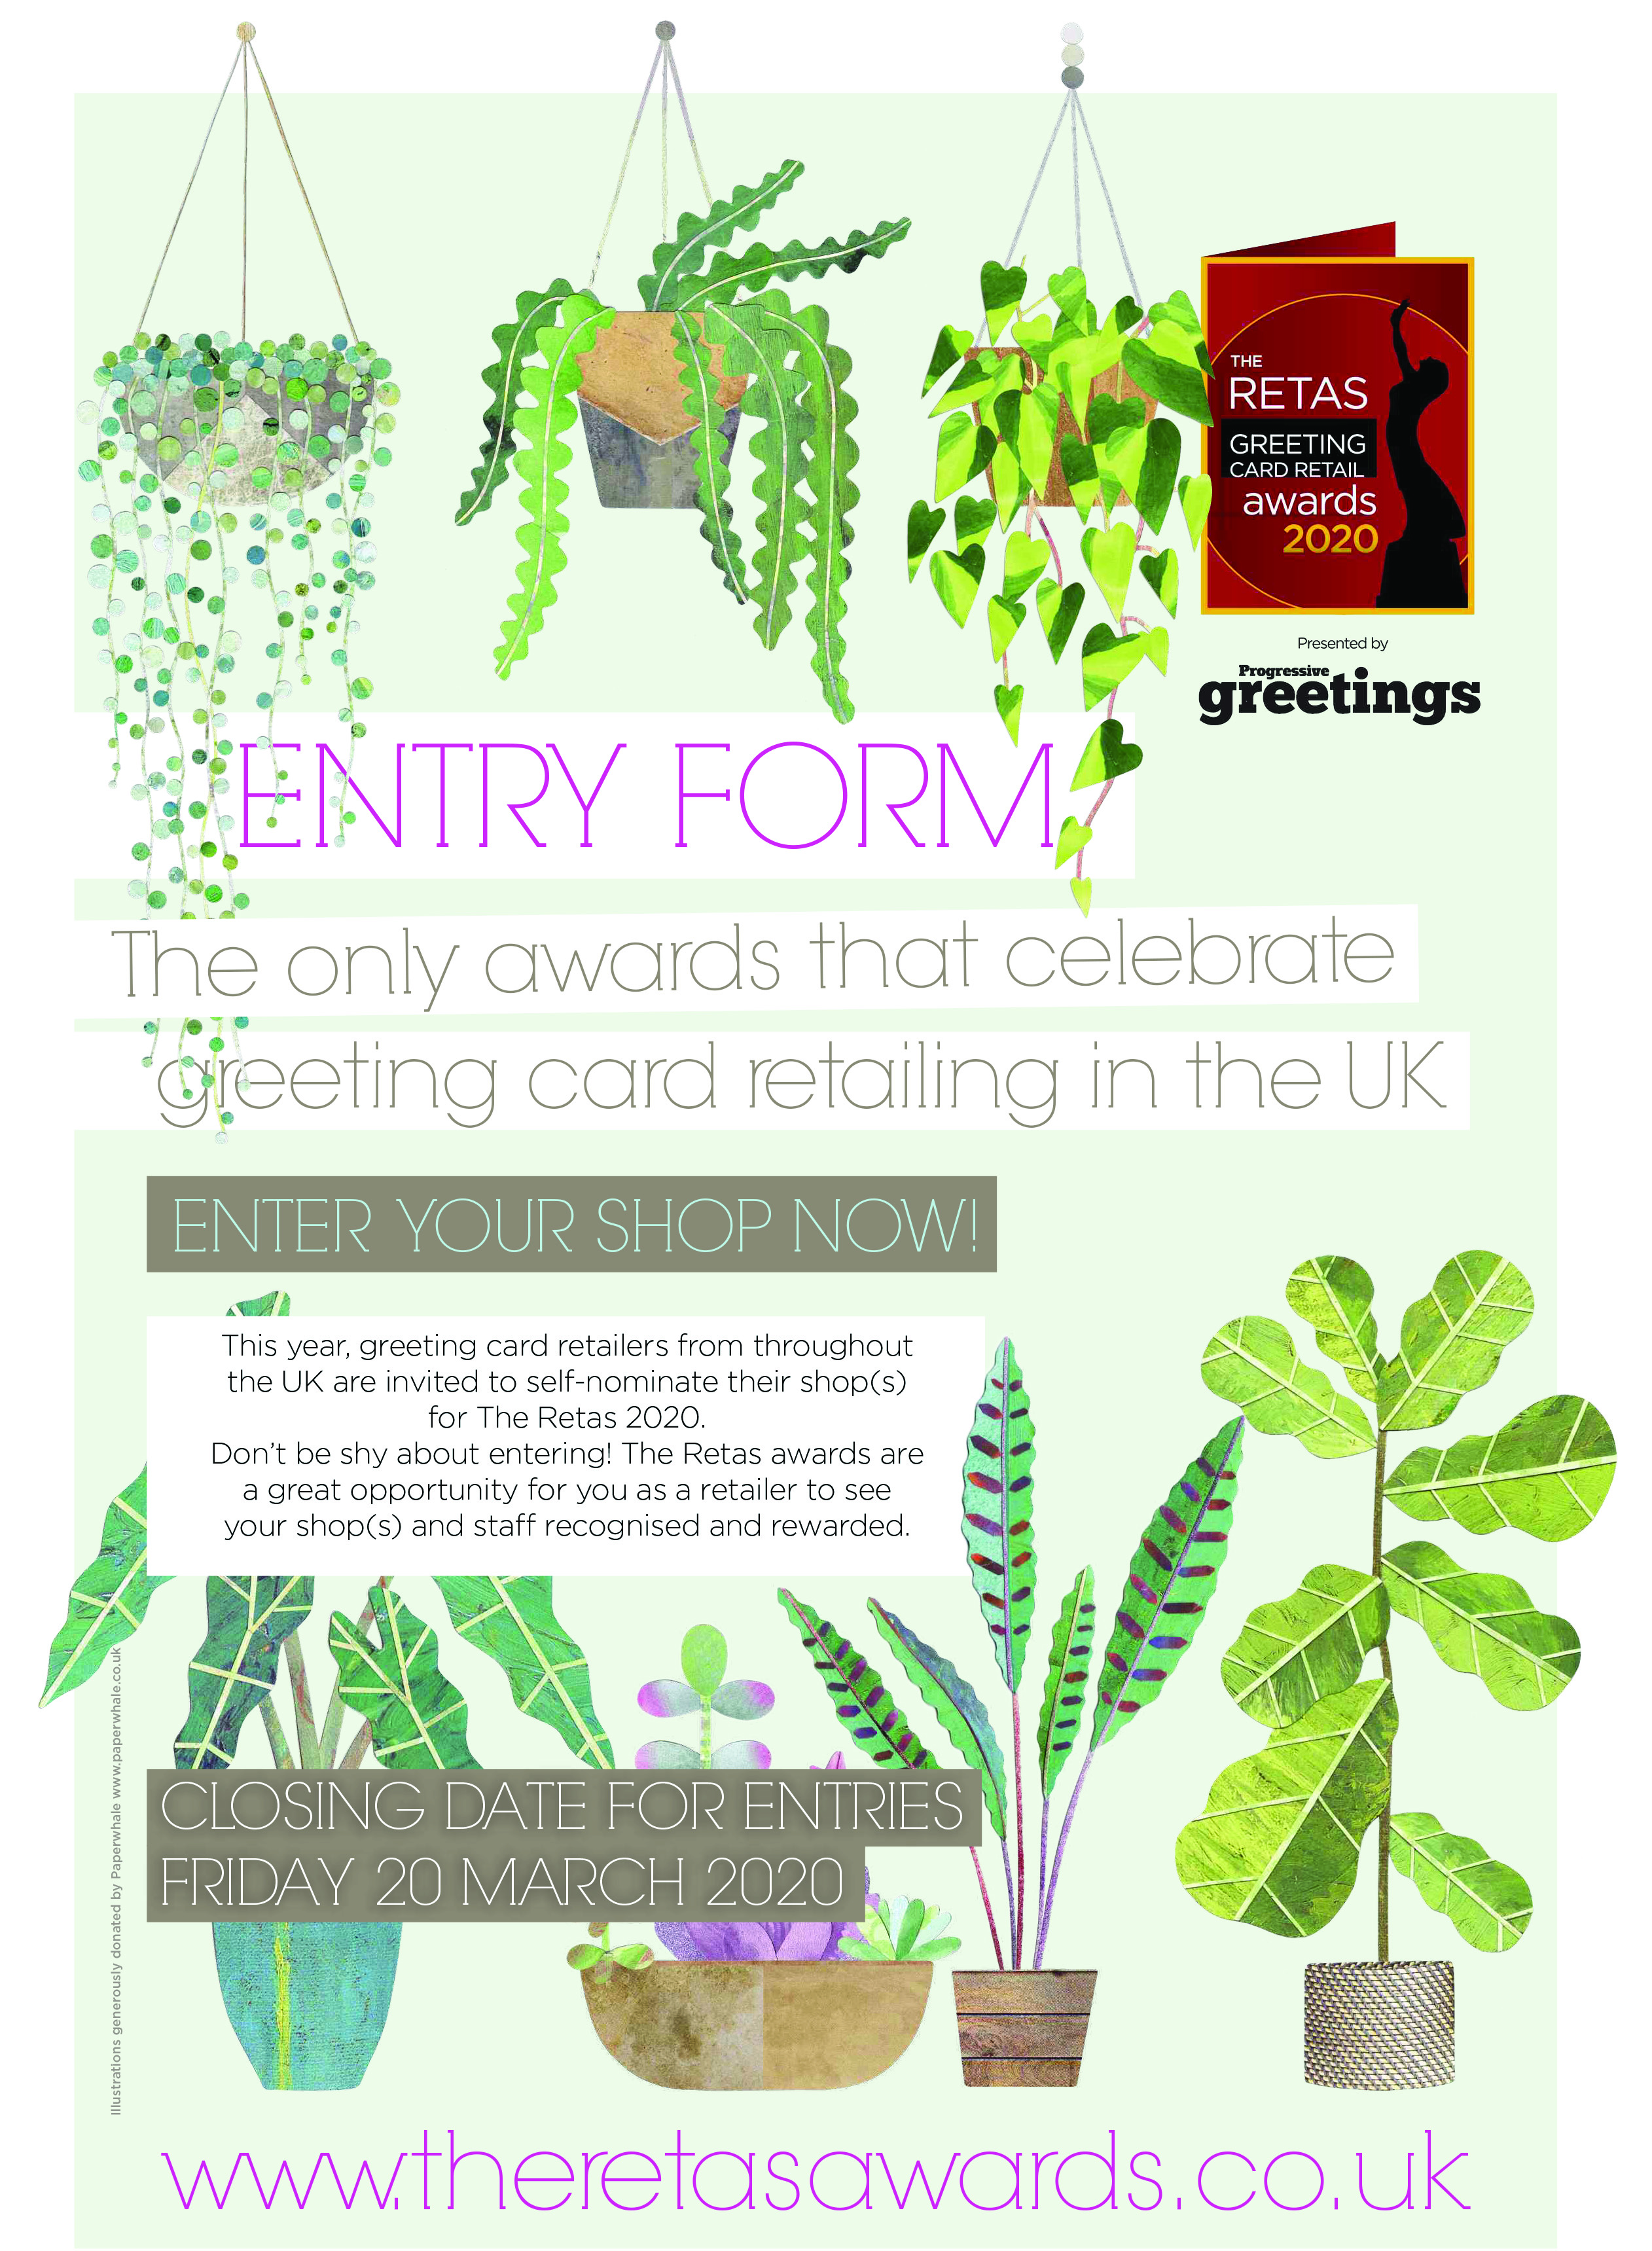 Above: The Retas entry form which features imagery by Lianne Harrison, founder of Paperwhale Cards in keeping with the Finery of Greenery theme of the awards event this year.